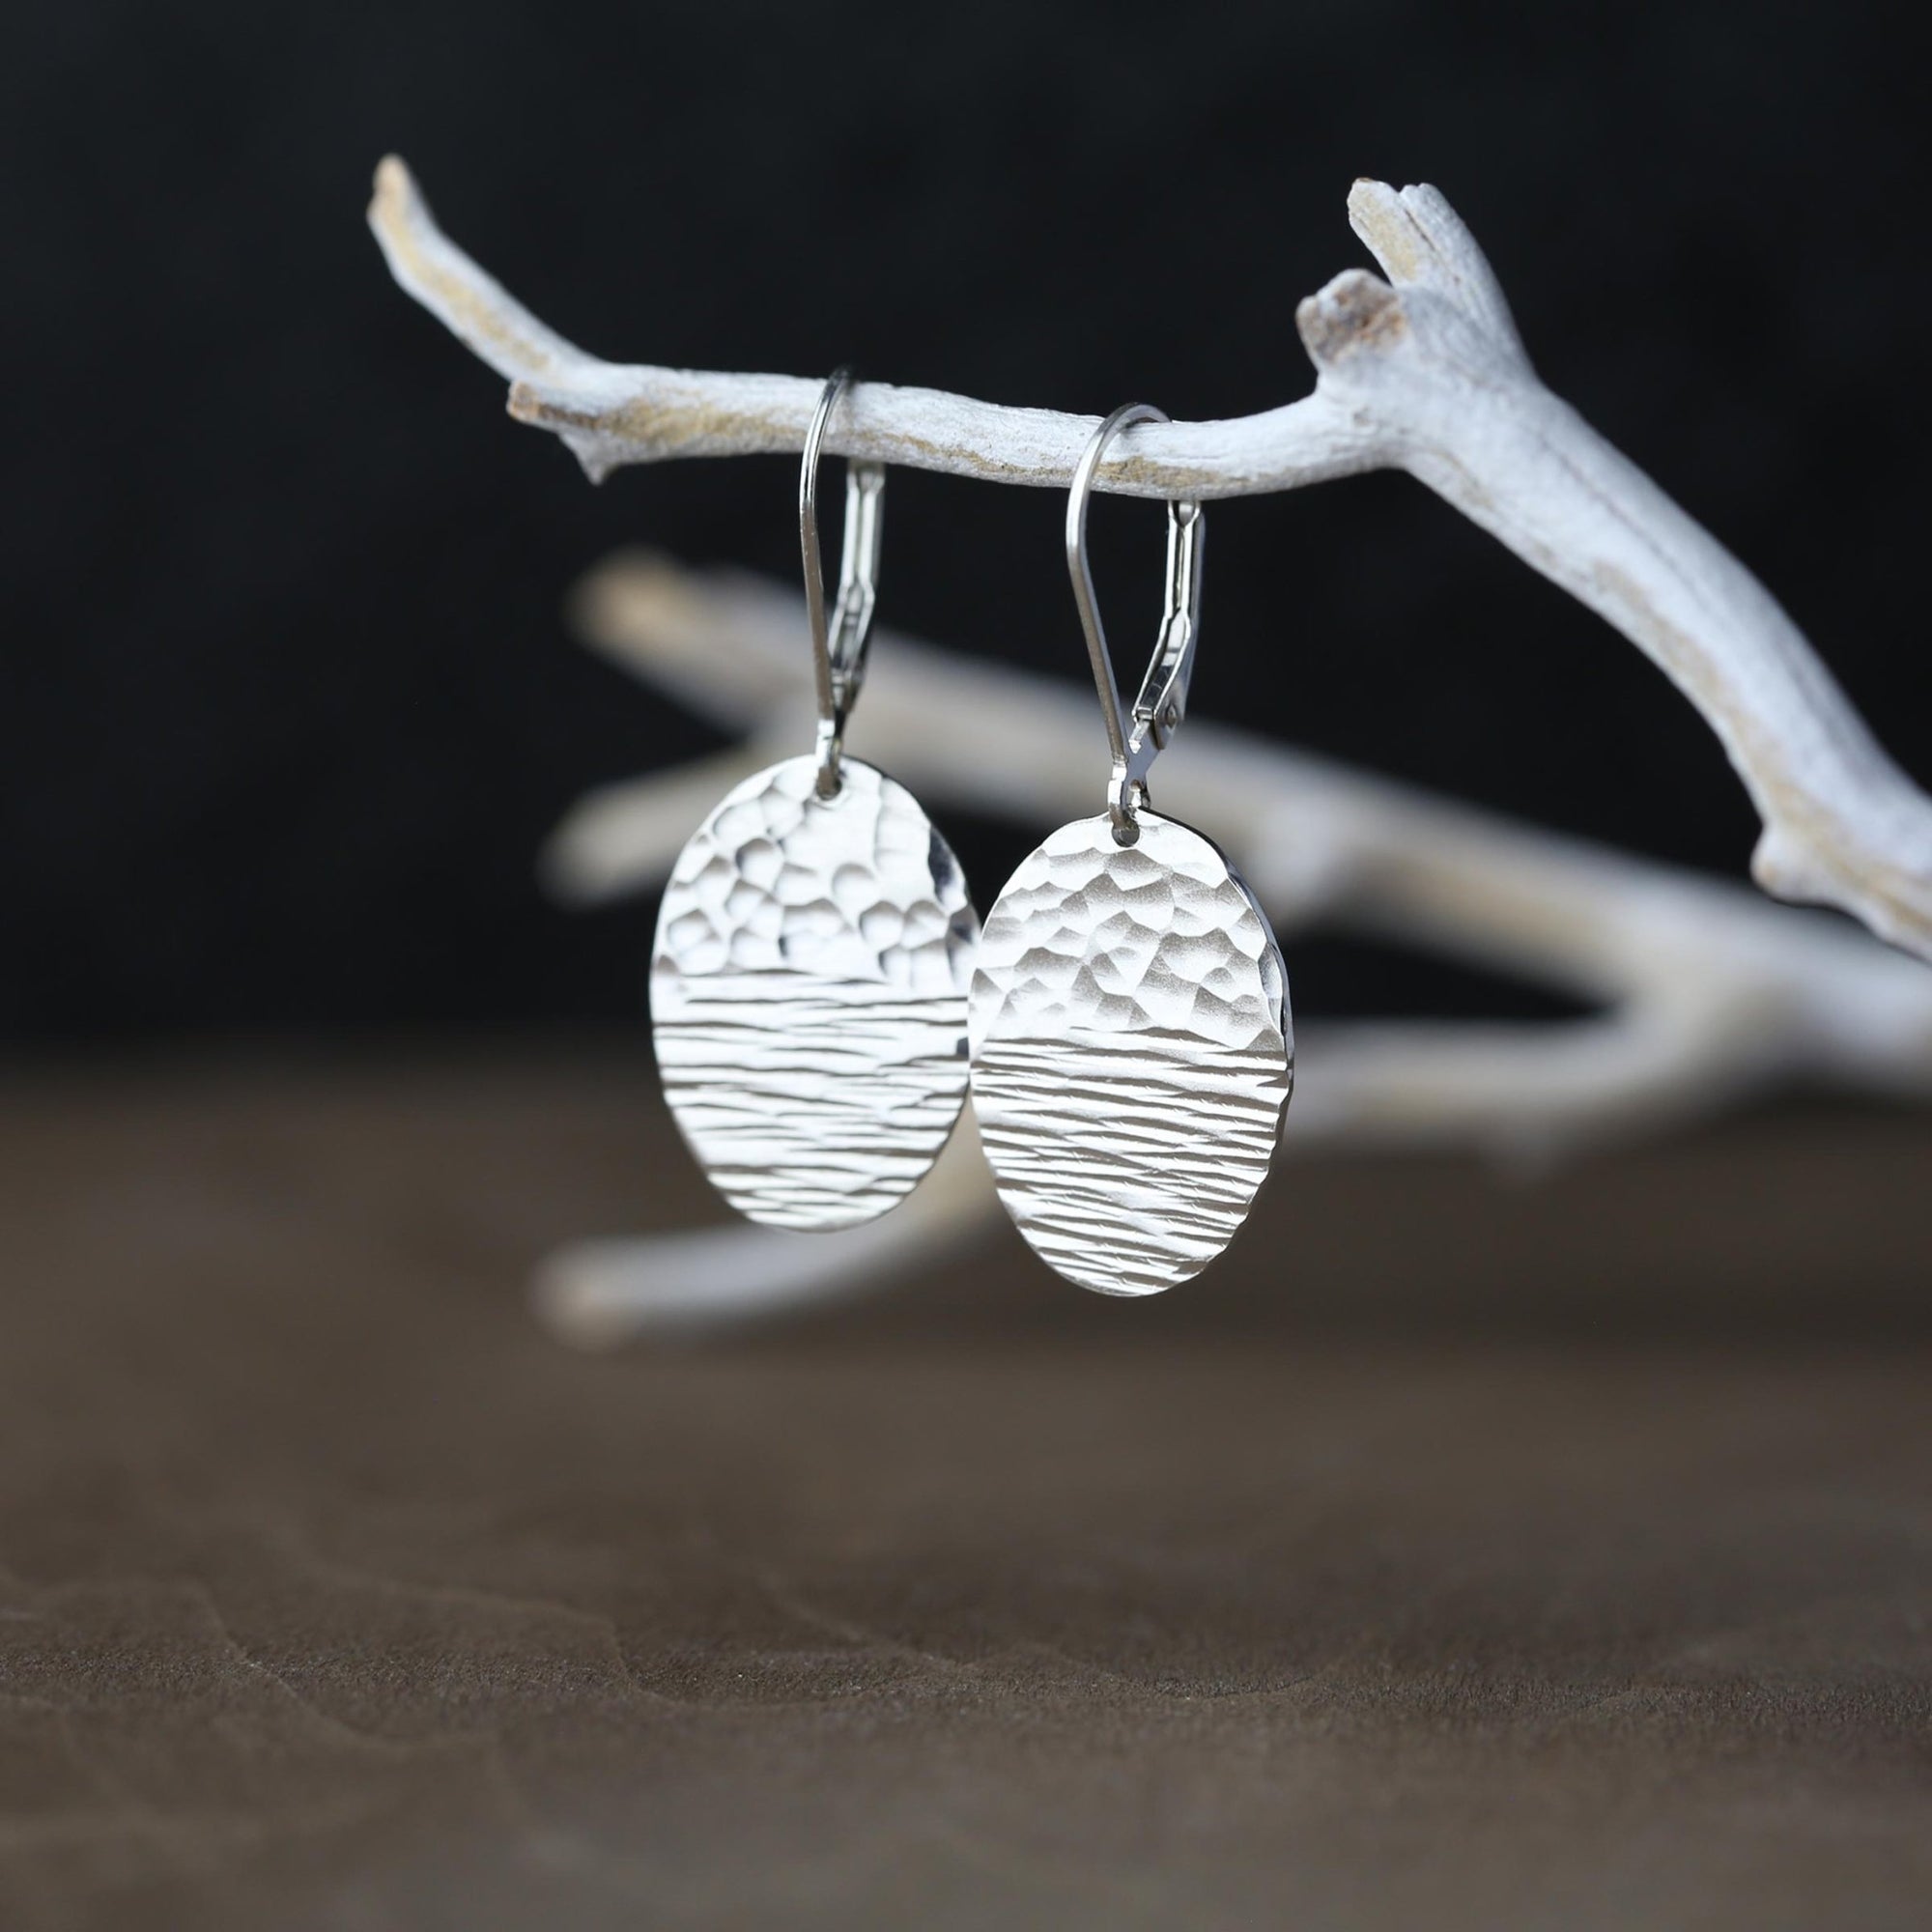 Duo Textured Silver Oval Earrings handmade by Burnish